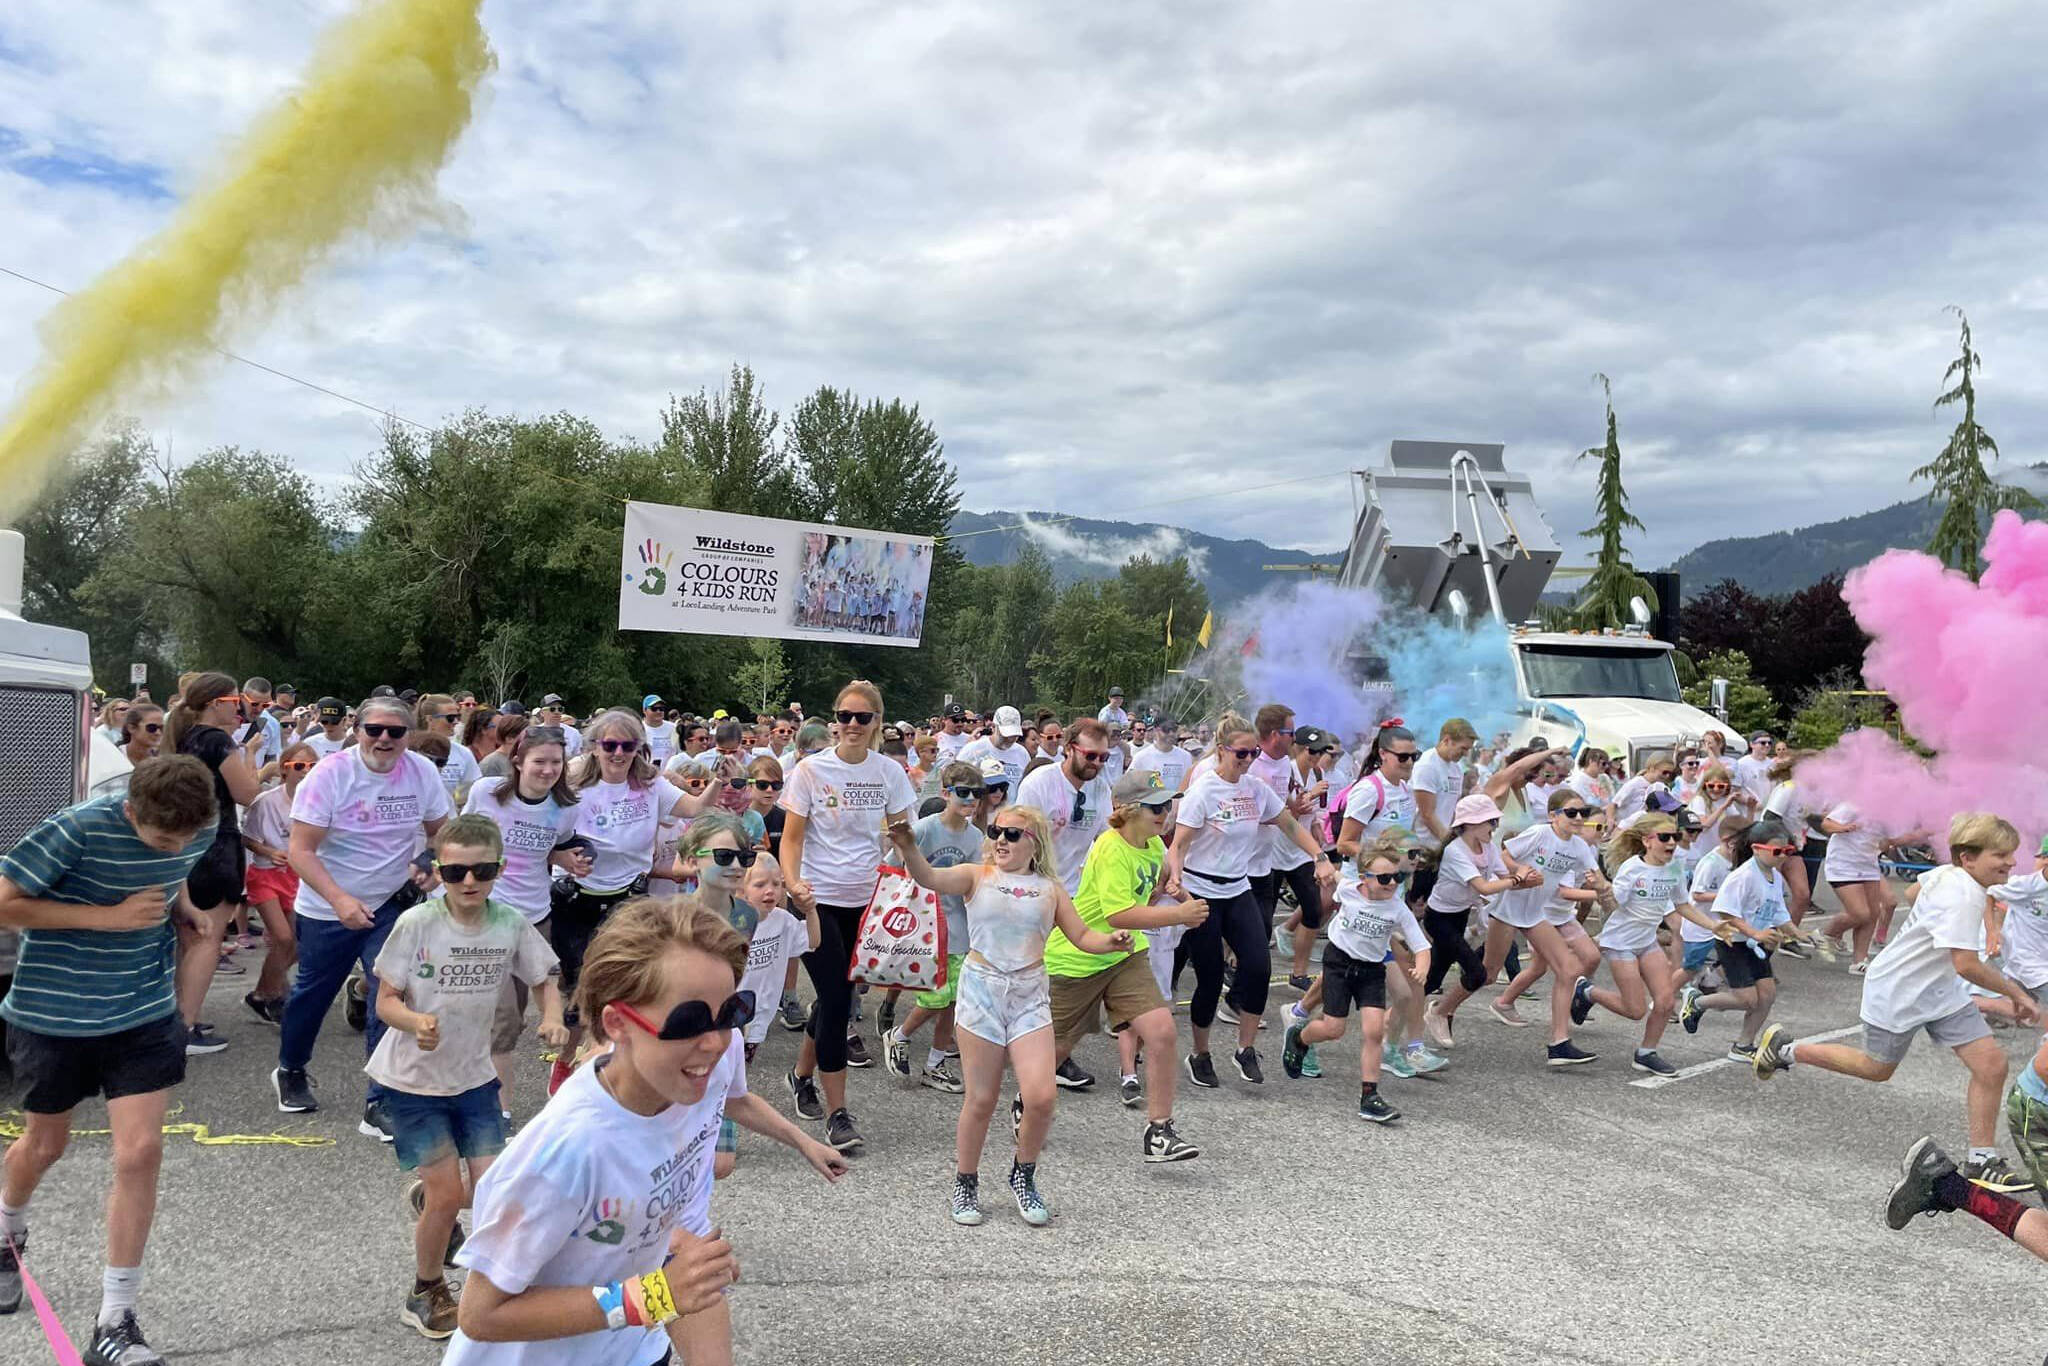 Over 770 people came to run at Colours 4 Kids. (City of Penticton)